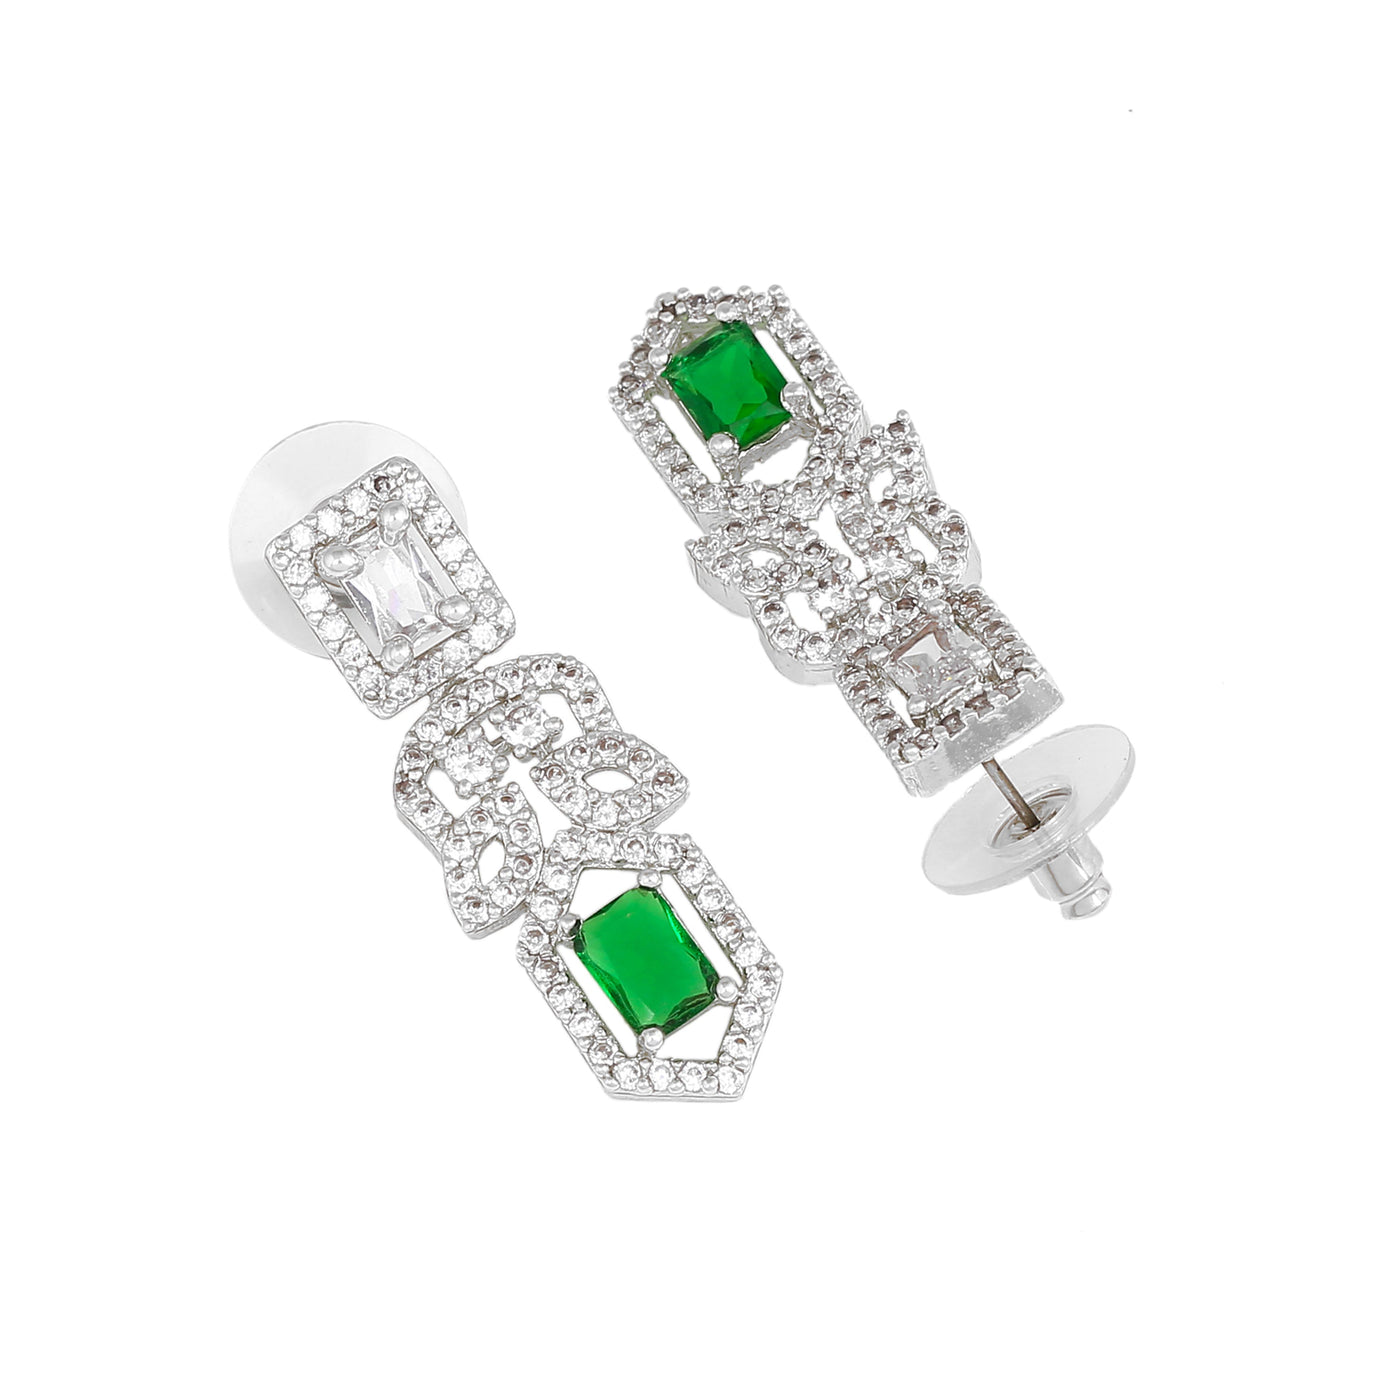 Estele Rhodium Plated CZ Sparkling Designer Earrings with Green Crystals for Women